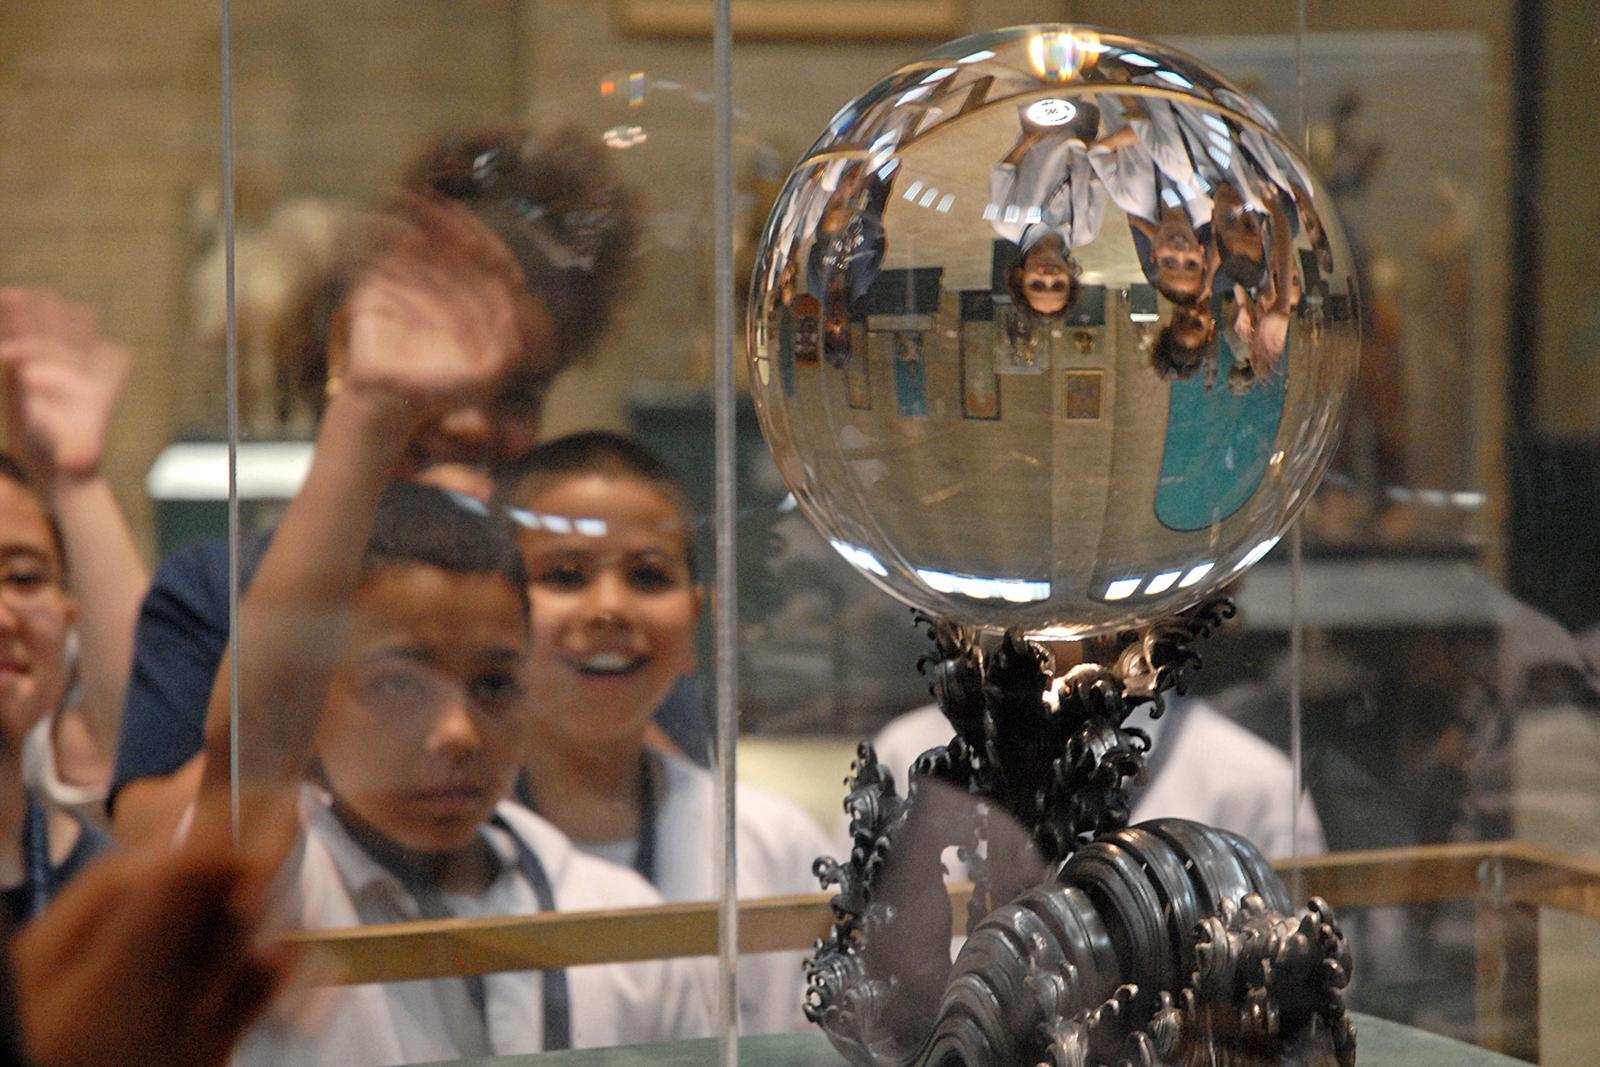 A group of school children in white polo shirts wave and gesture at the crystal ball, seeing themselves reflected upside down 